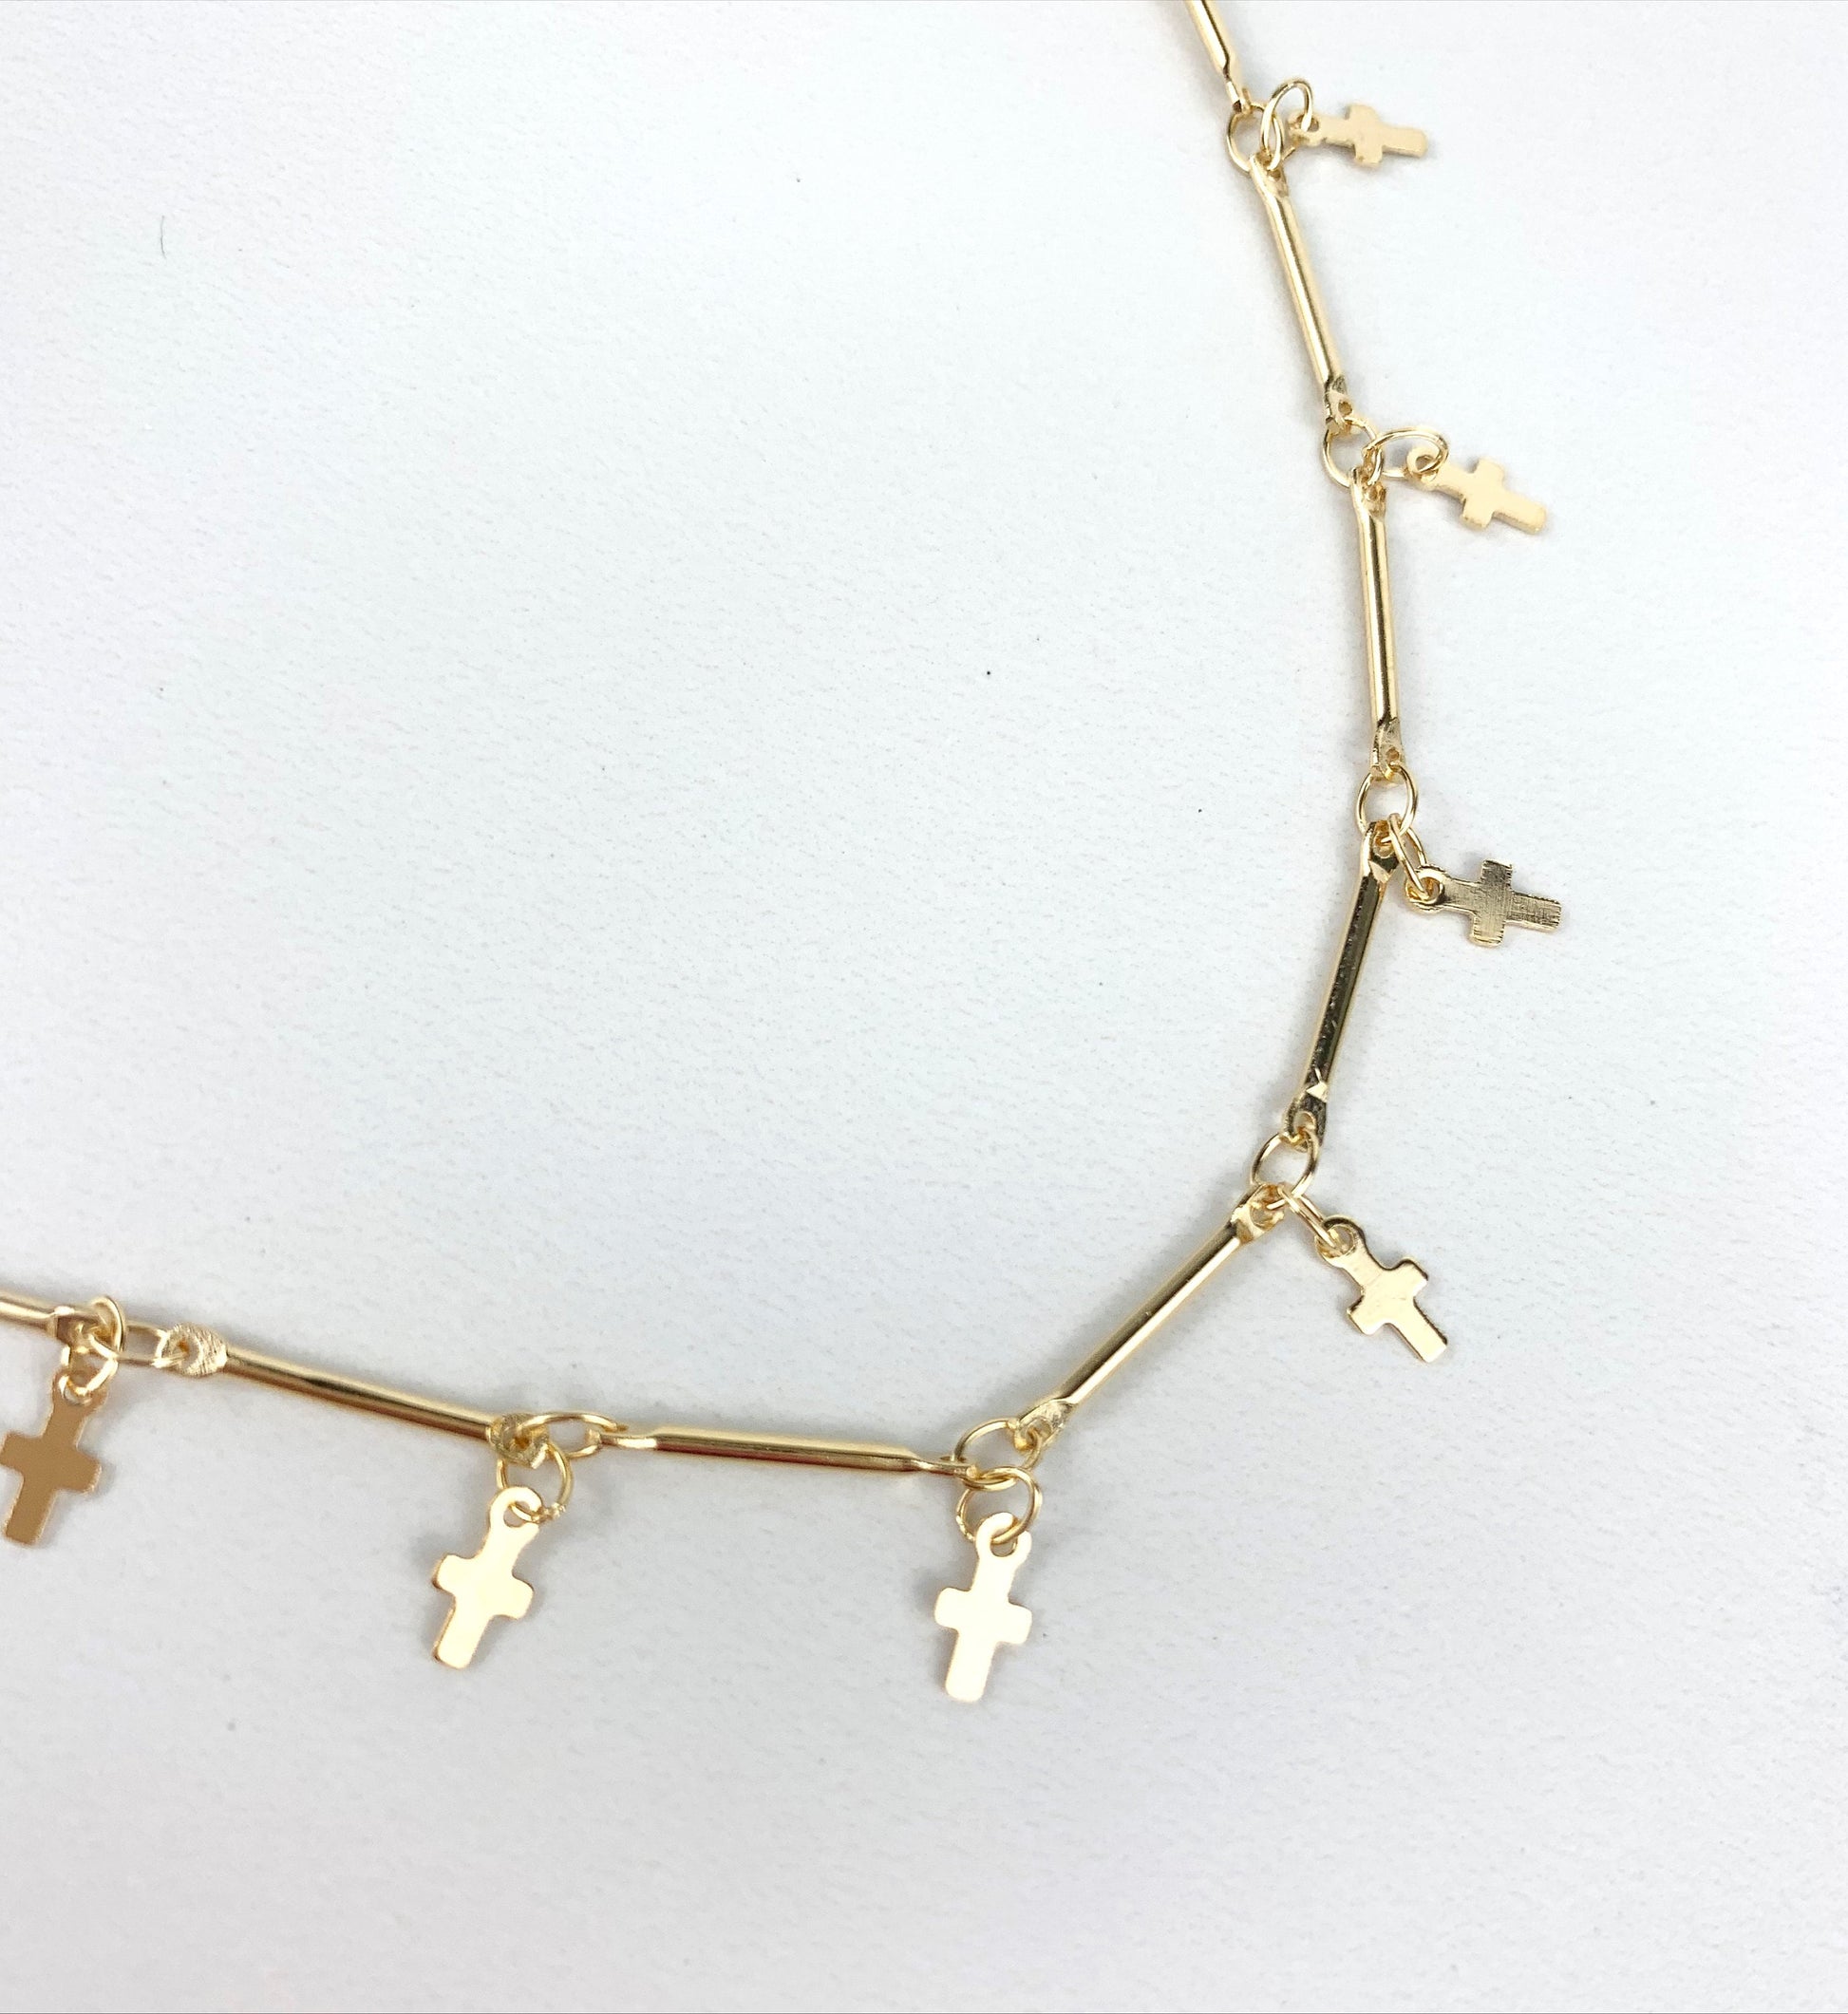 18k Gold Filled Fancy Crosses Charms Necklace Choker Wholesale Jewelry Supplies